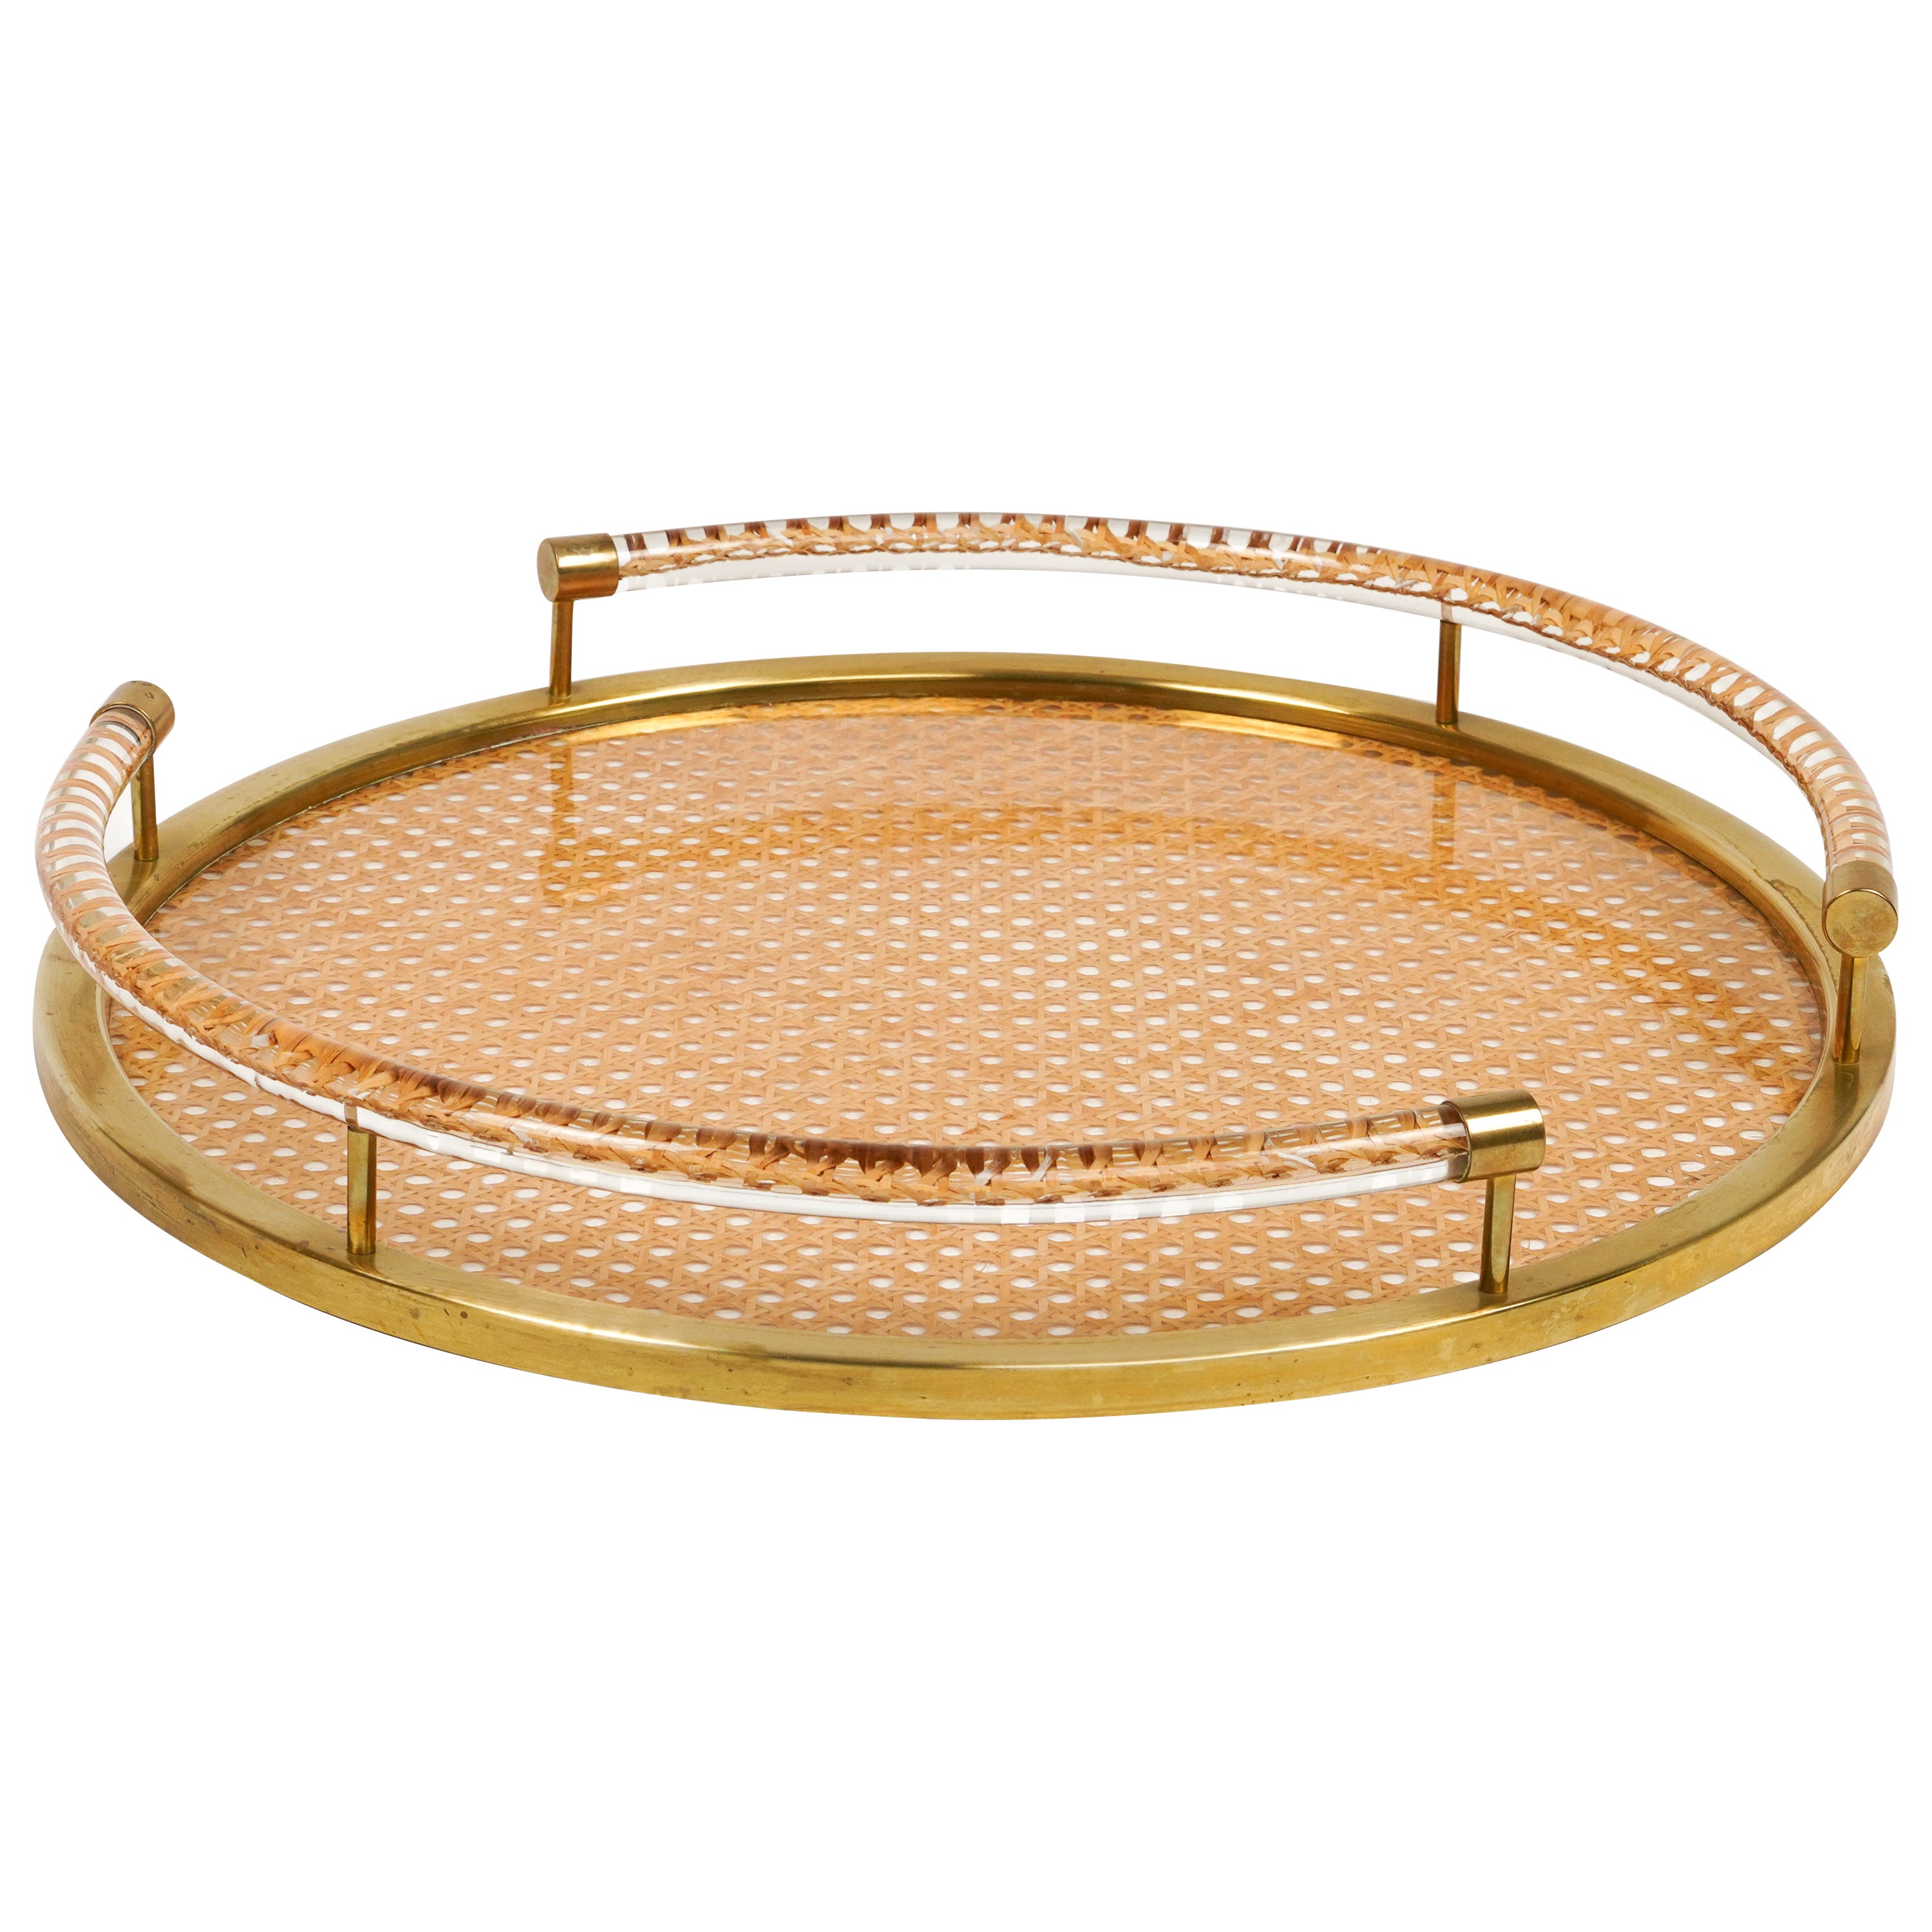 Round Serving Tray in Lucite, Rattan and Brass Christian Dior Style, Italy 1970s For Sale